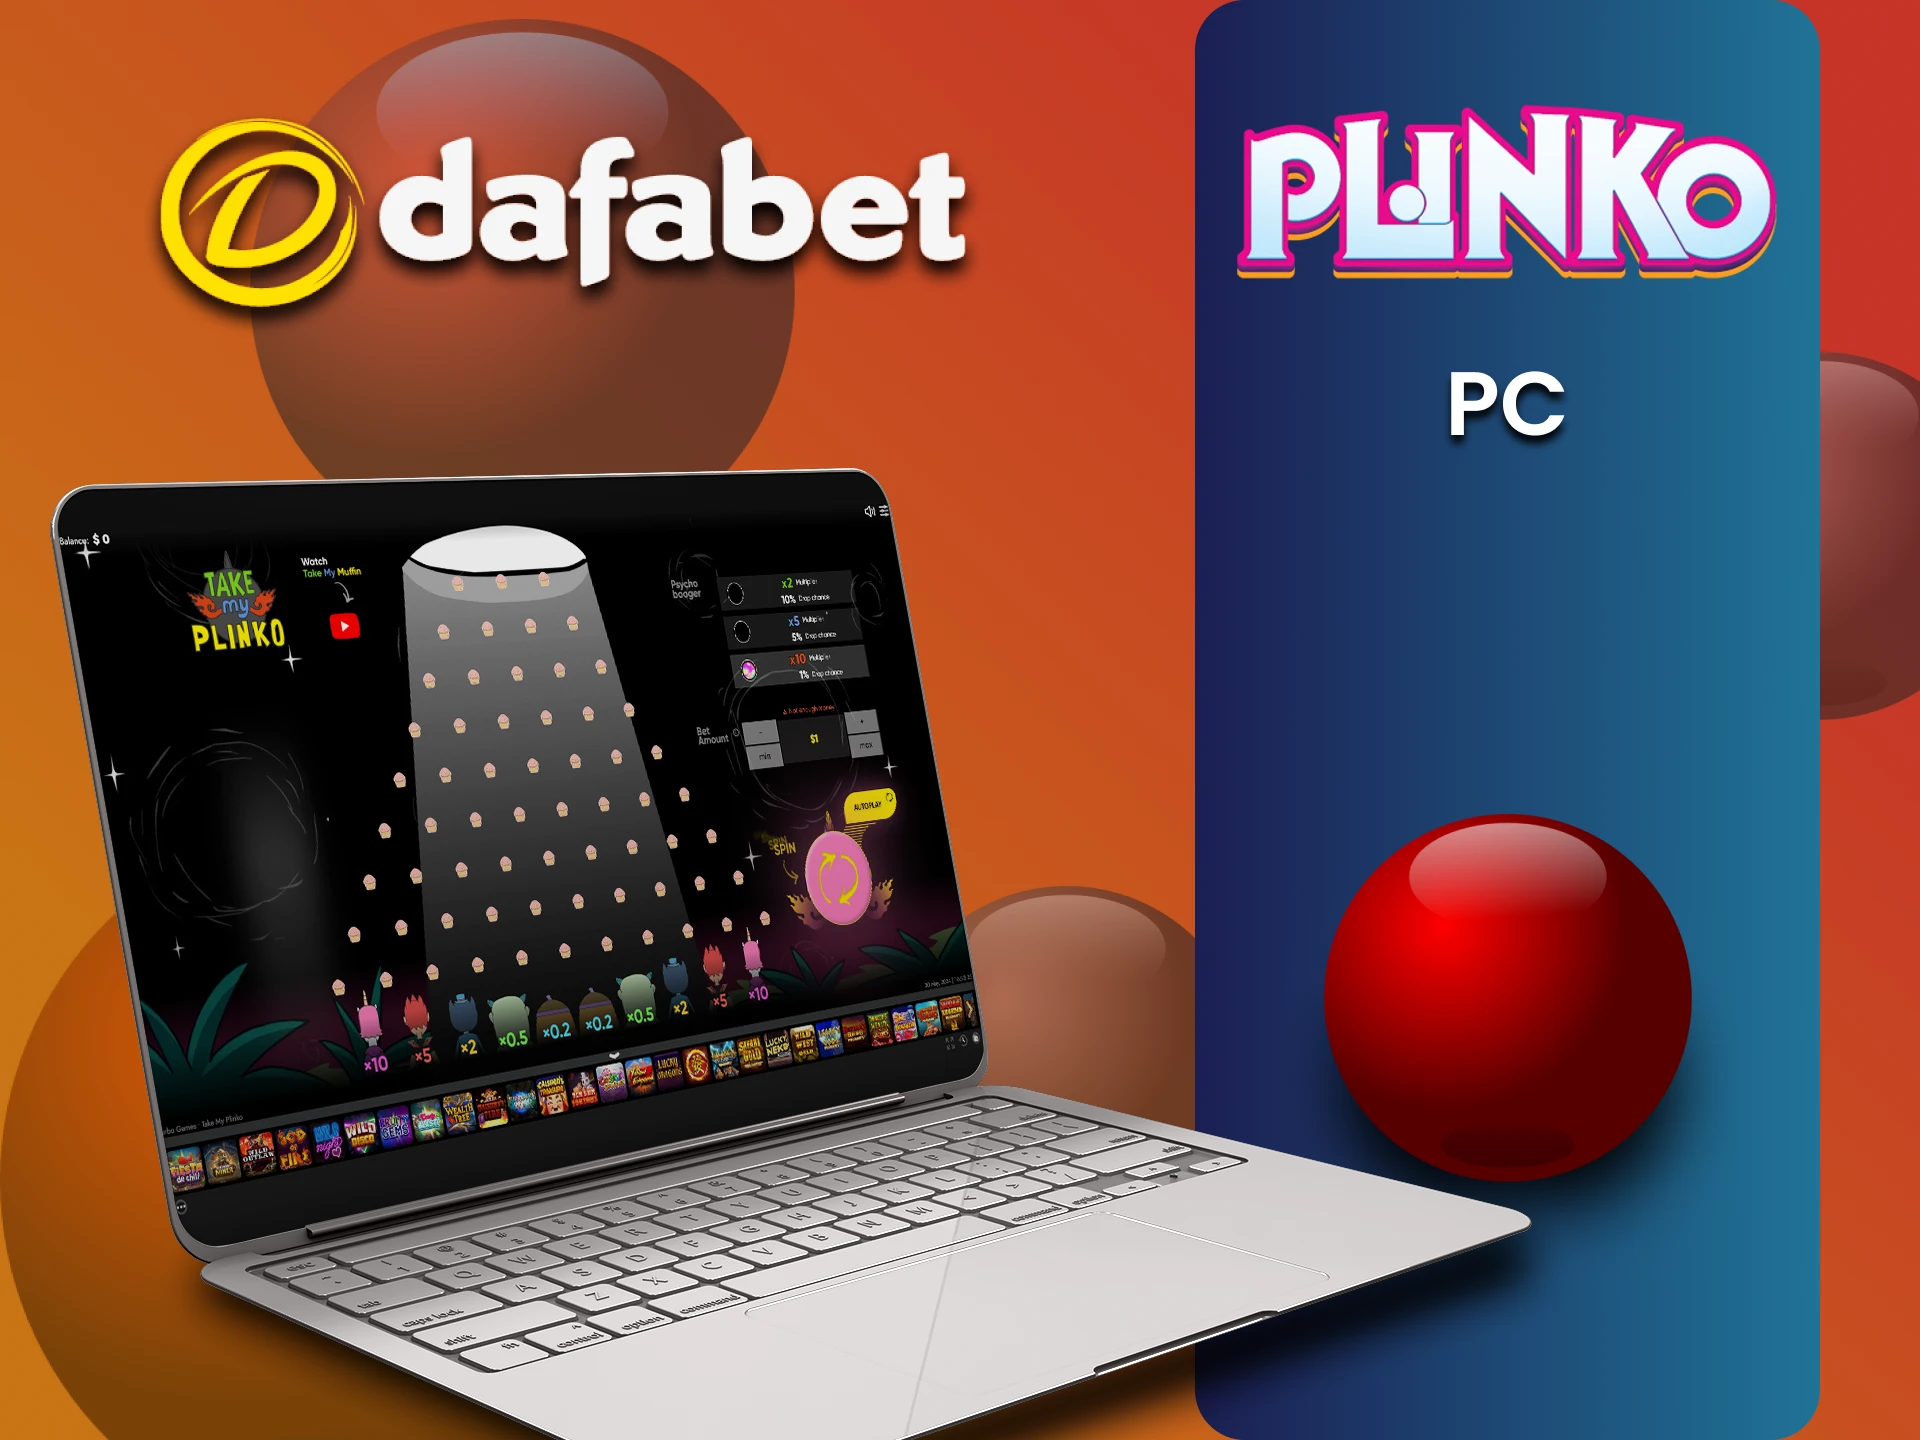 You can play Plinko on the Dafabet website via PC.